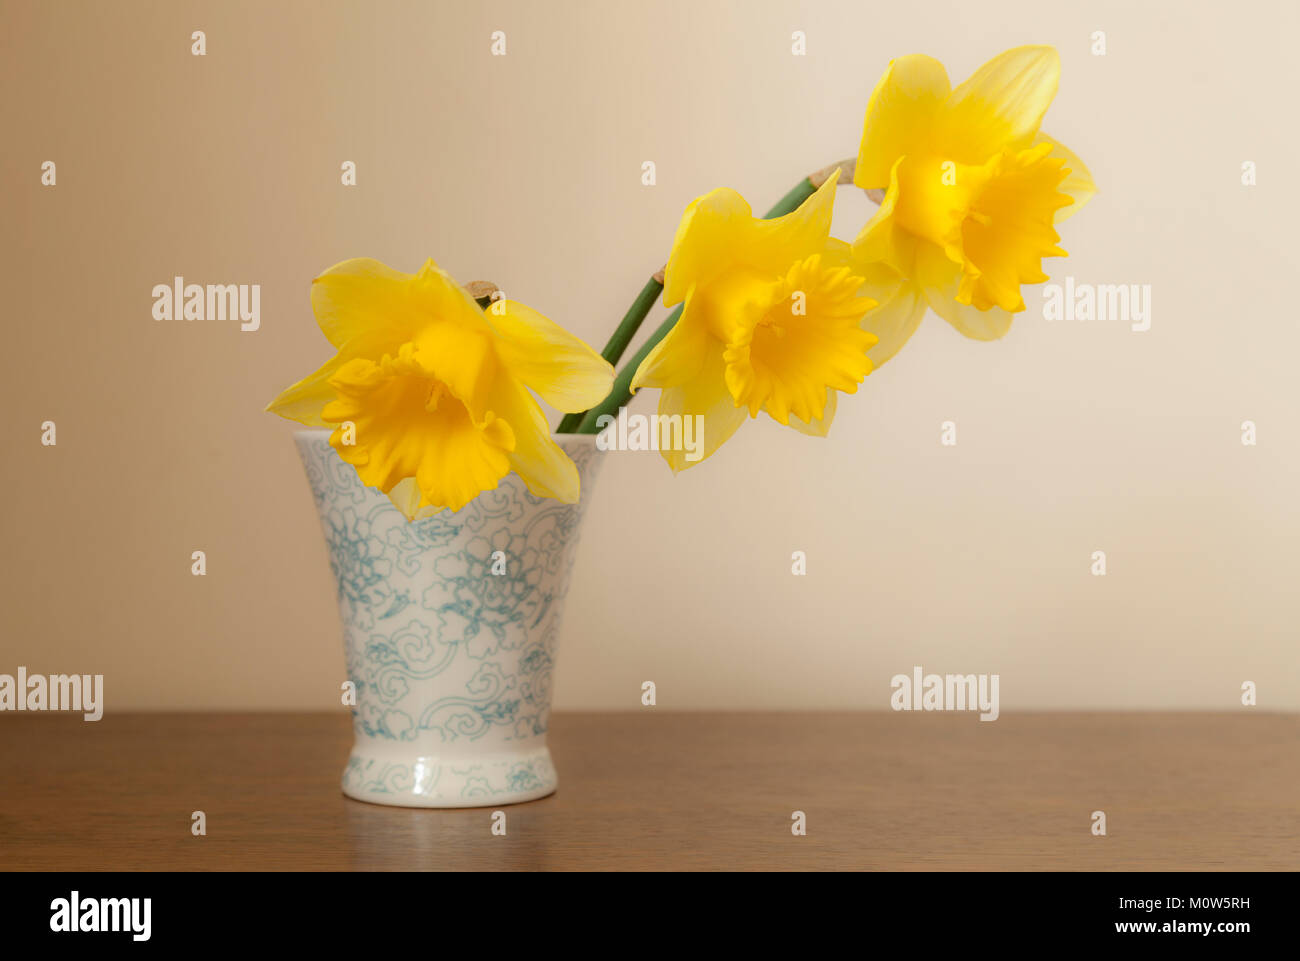 Three daffodil stems arranged in a small vase with blue floral design shot against a neutral background in natural light. Stock Photo